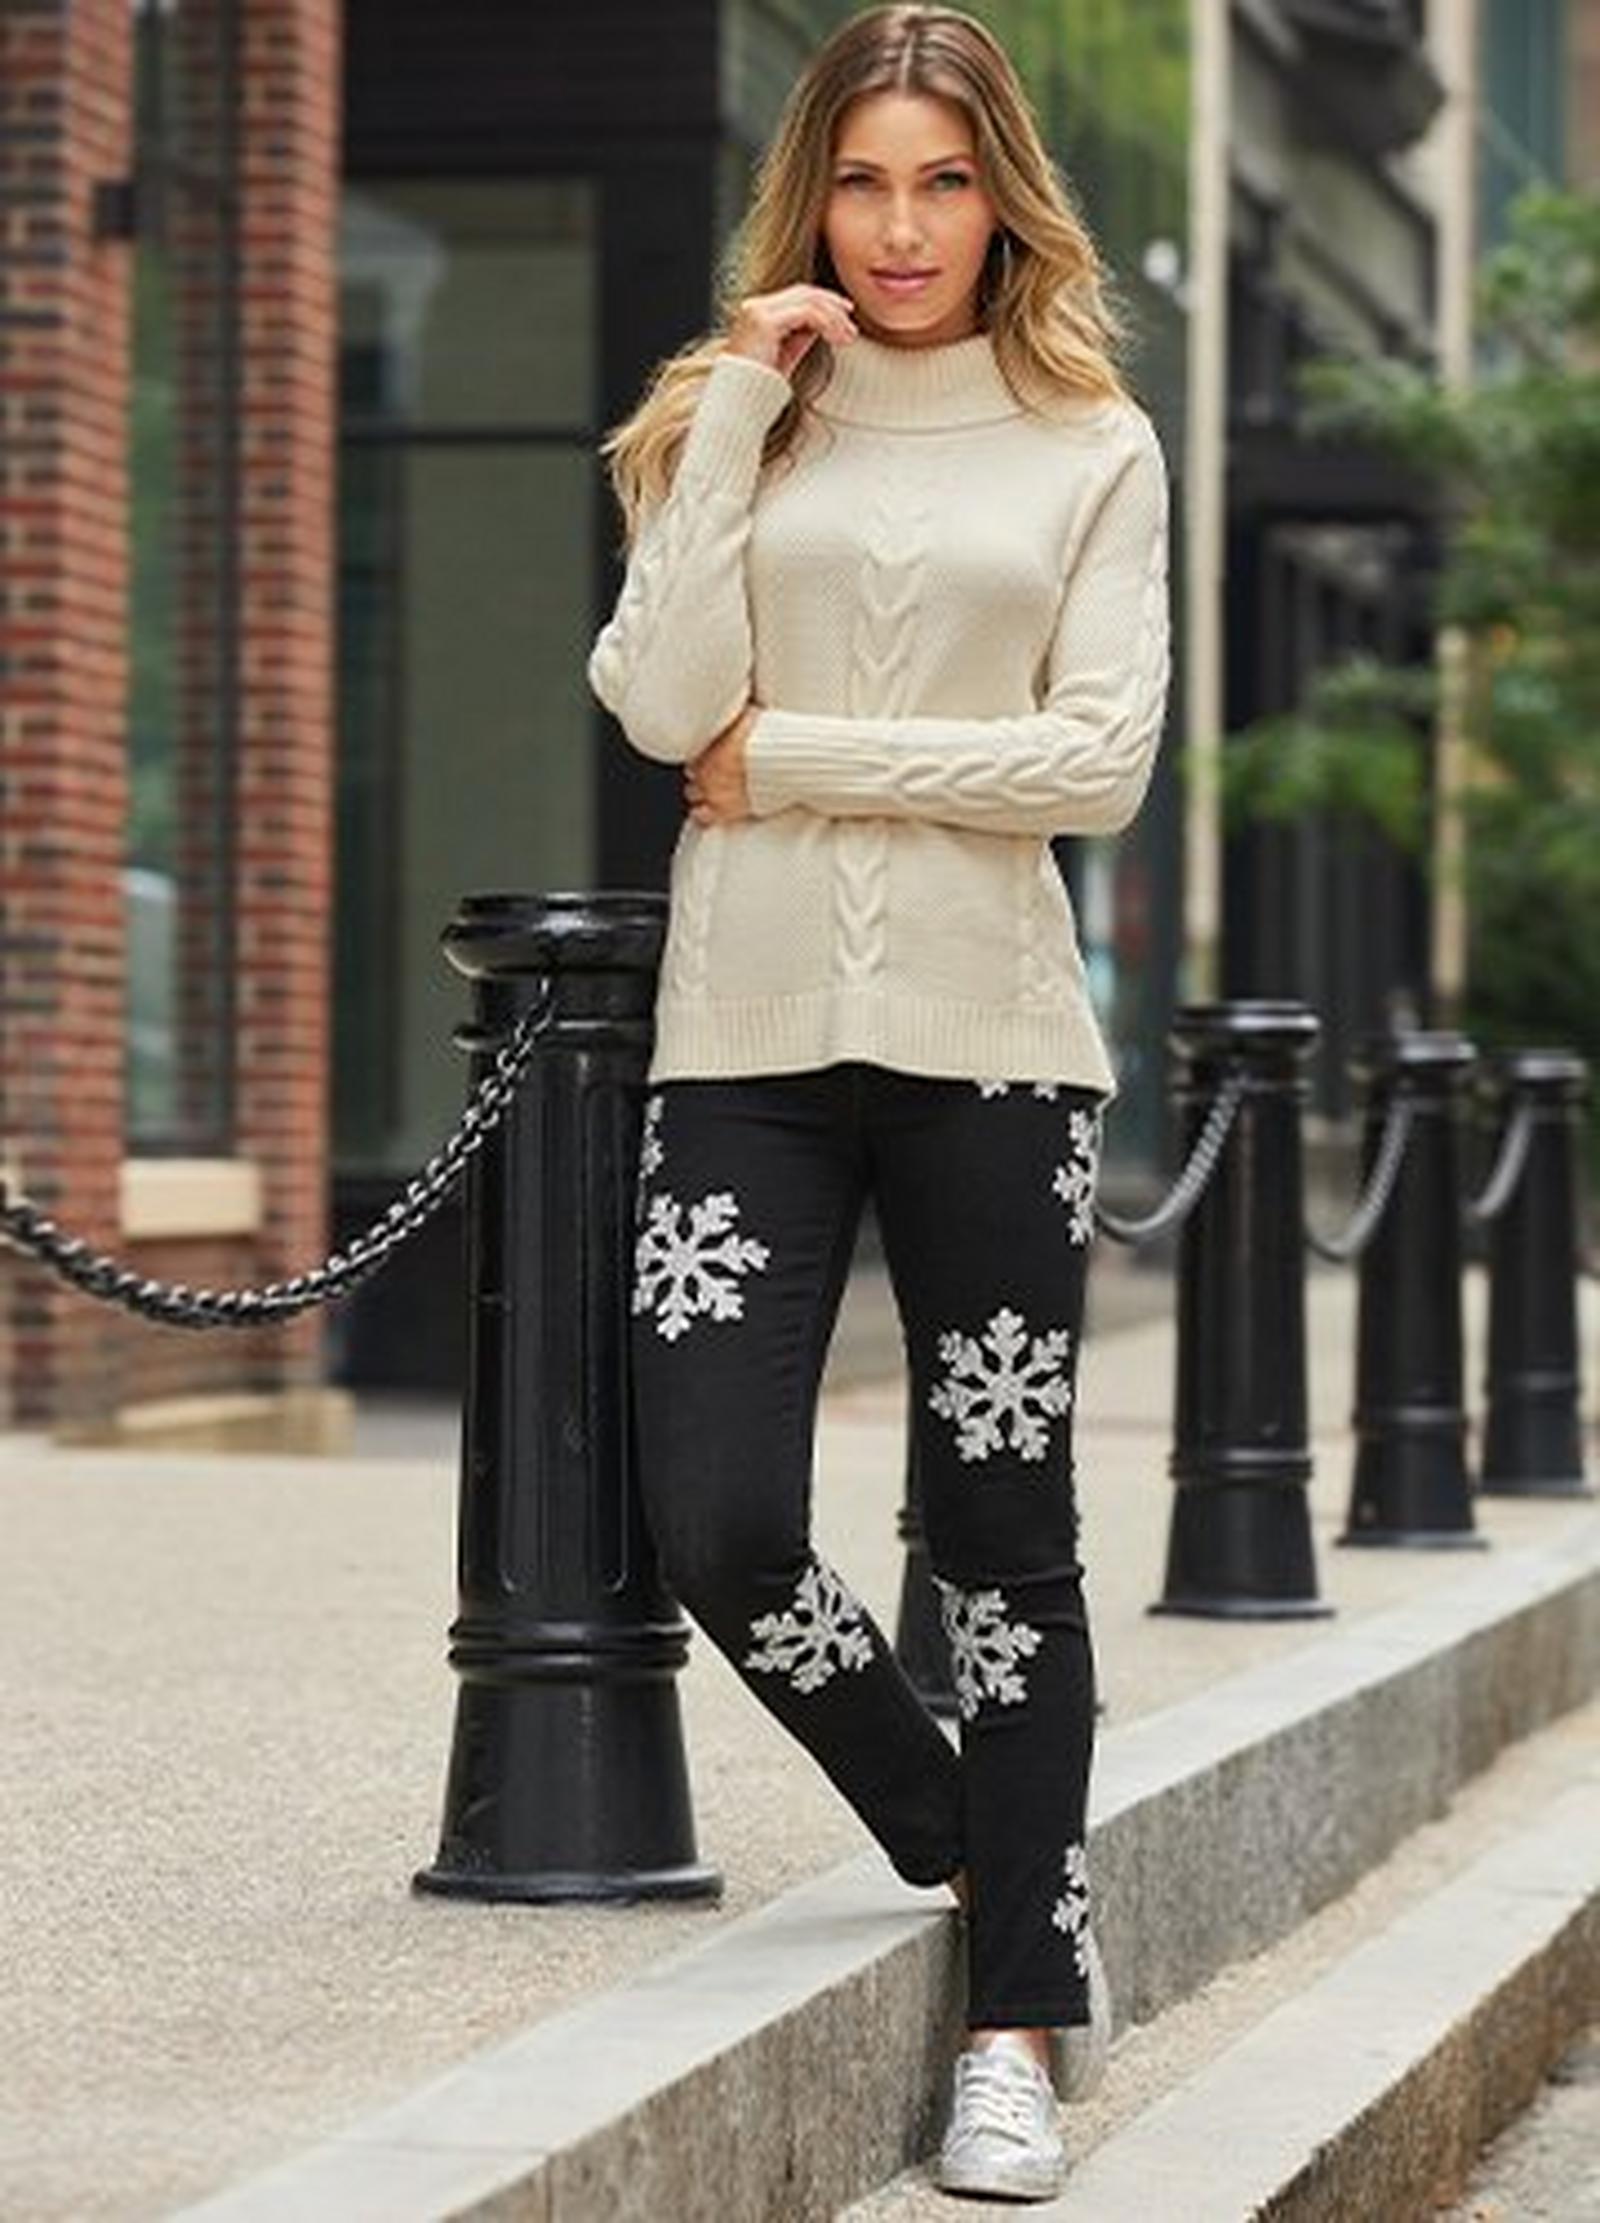 model wearing a white cable knit turtleneck sweater, black jeans with snowflake embellishment, and silver faux-shearling lined sneakers.